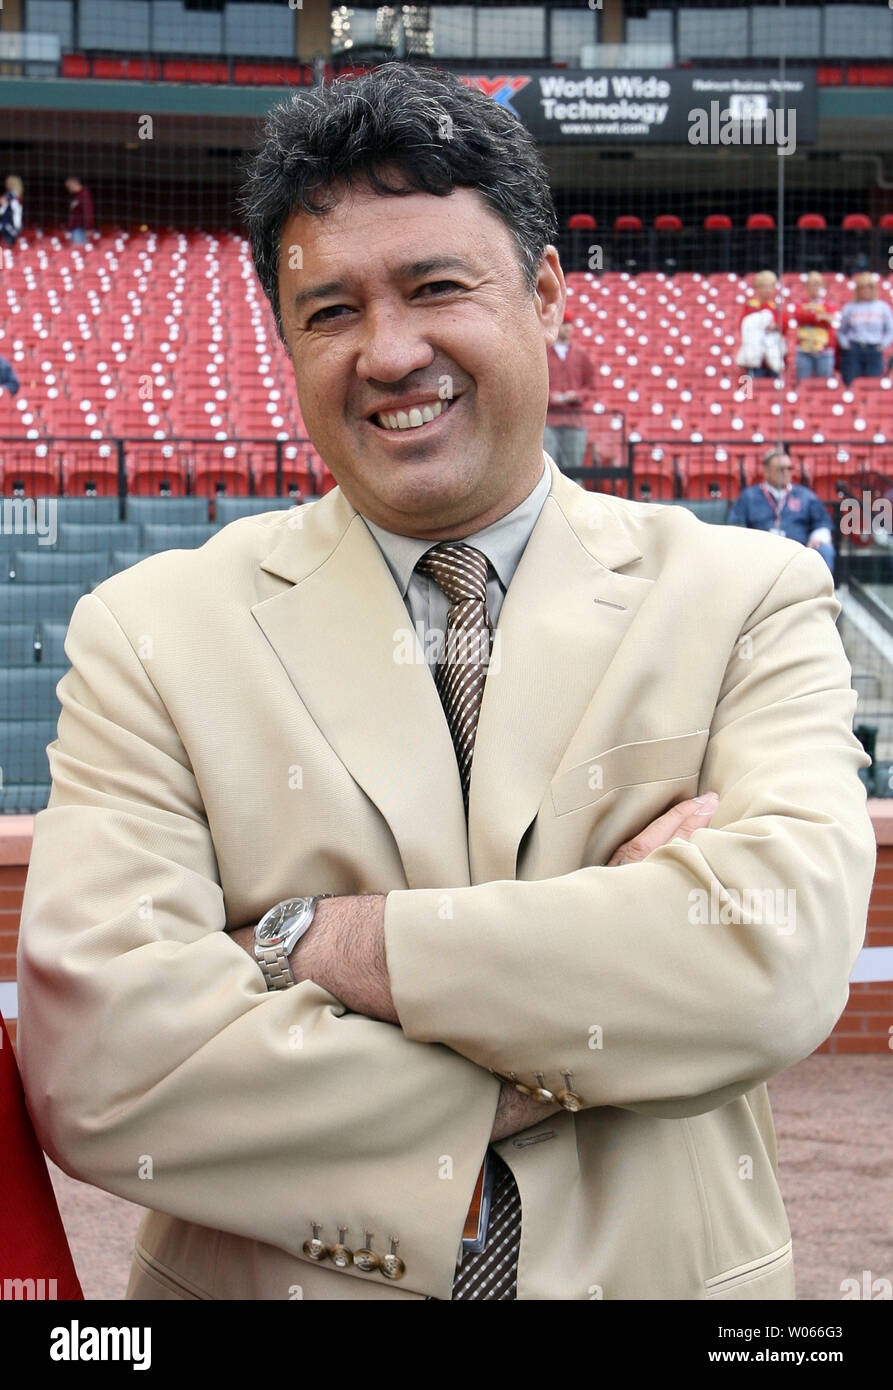 Wishing Ron Darling well; the Mets' broadcast is having surgery this week -  Amazin' Avenue